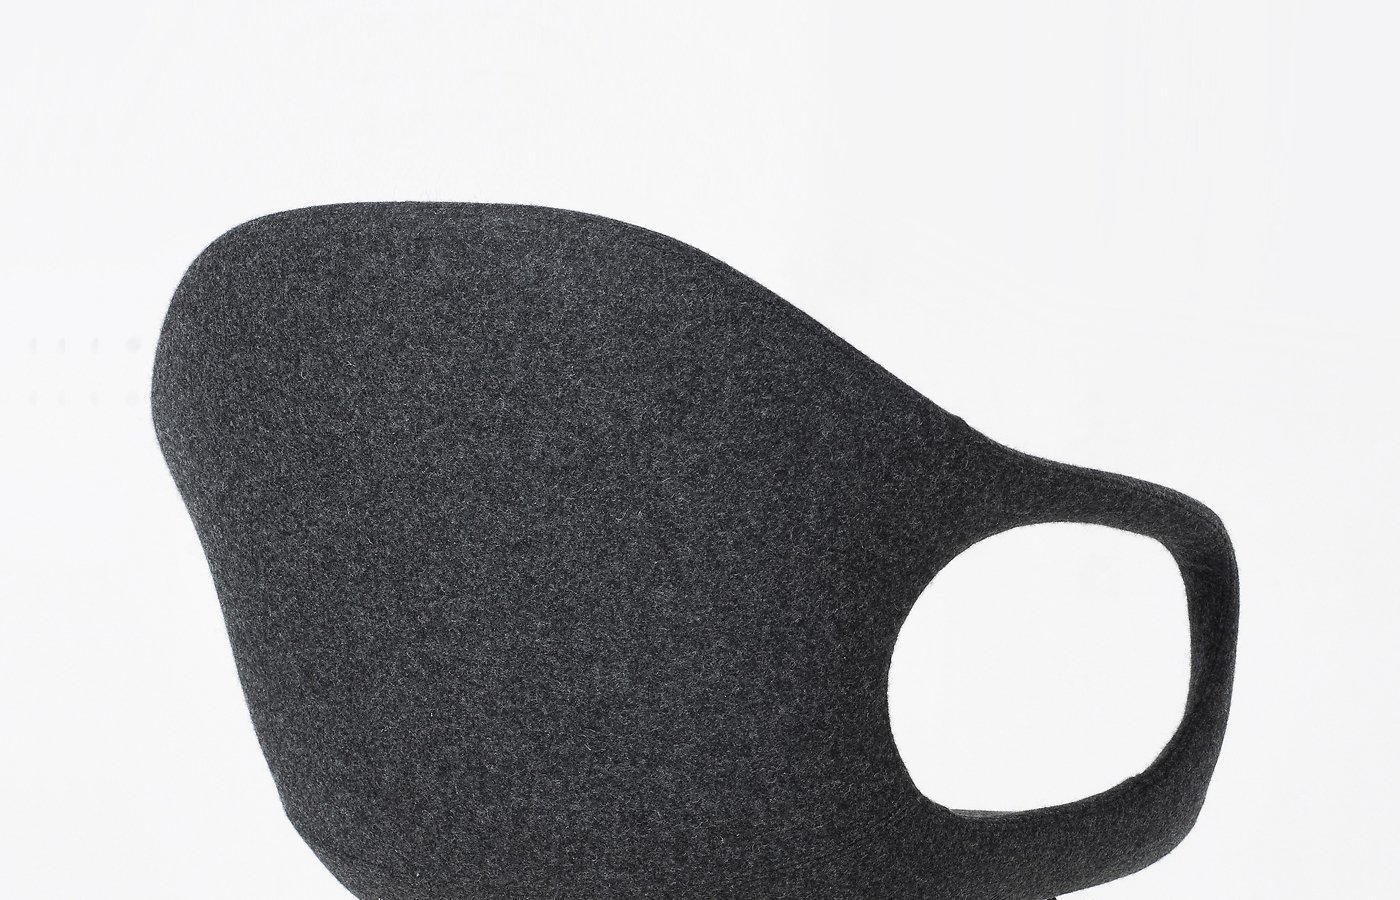 Elephant Chair from Kristalia, designed by Neuland